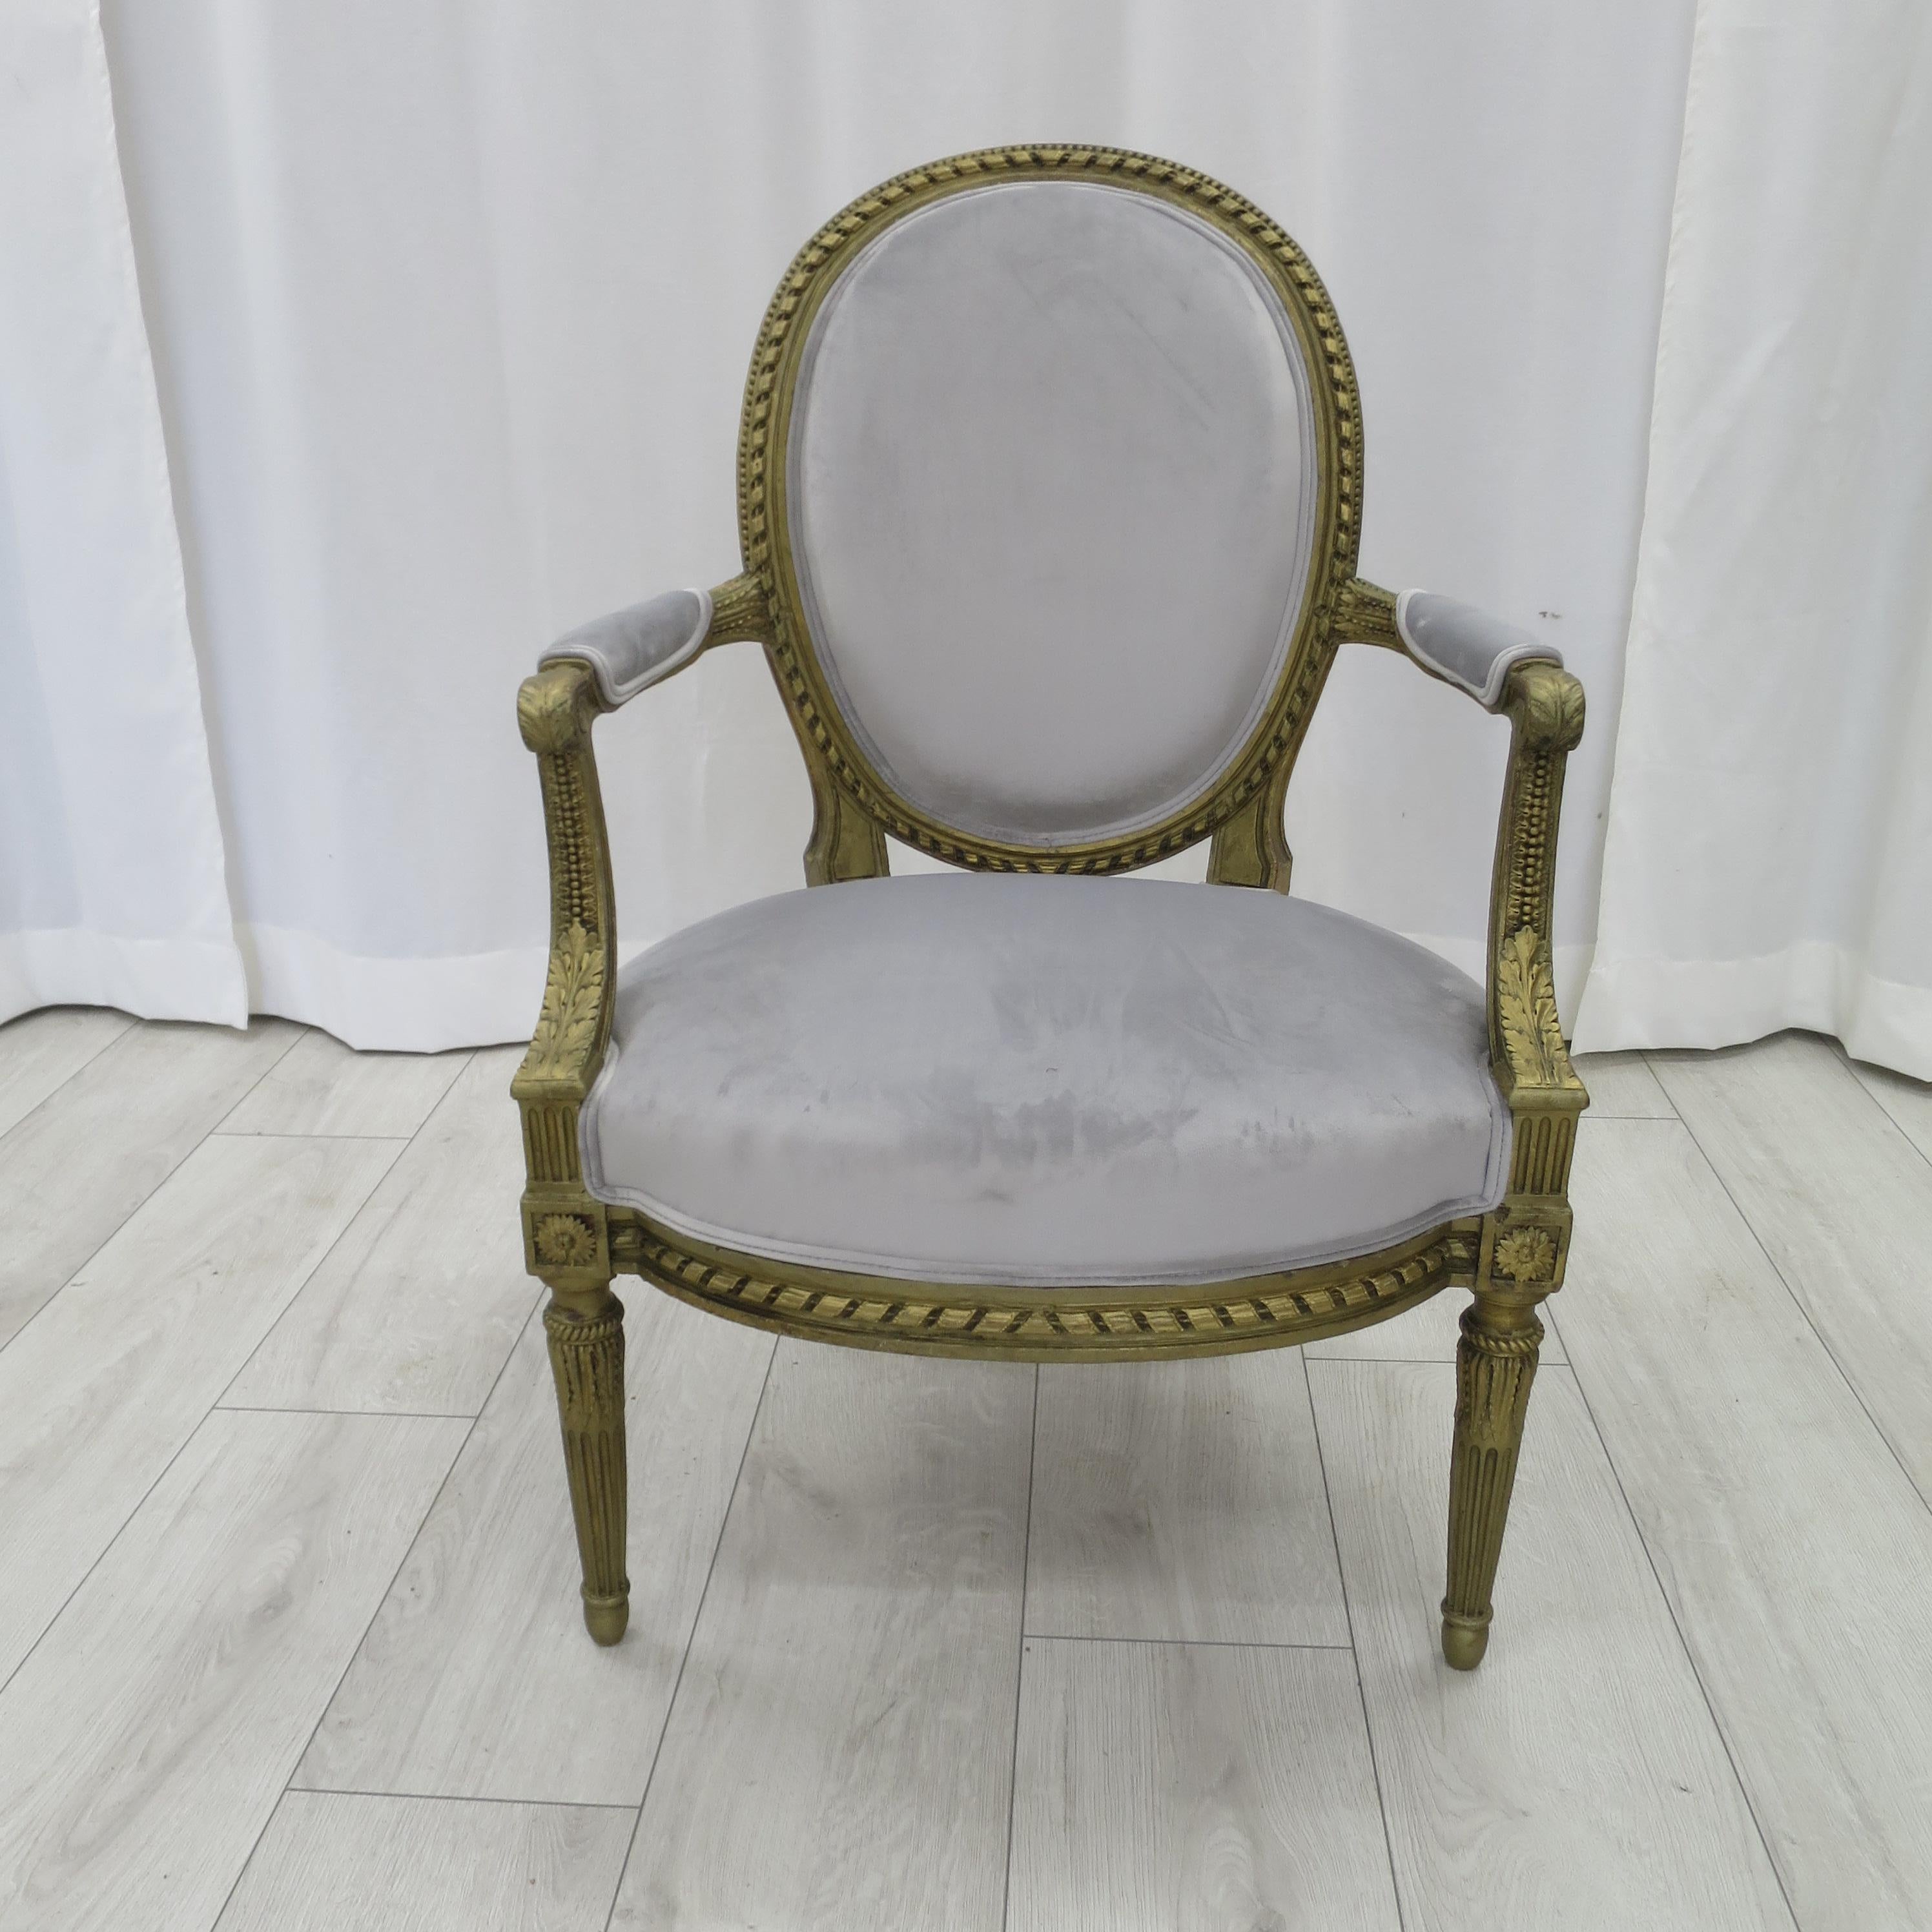 Carved Pair of Cabriolet Armchairs in Giltwood 19th Century Style Louis XVI For Sale